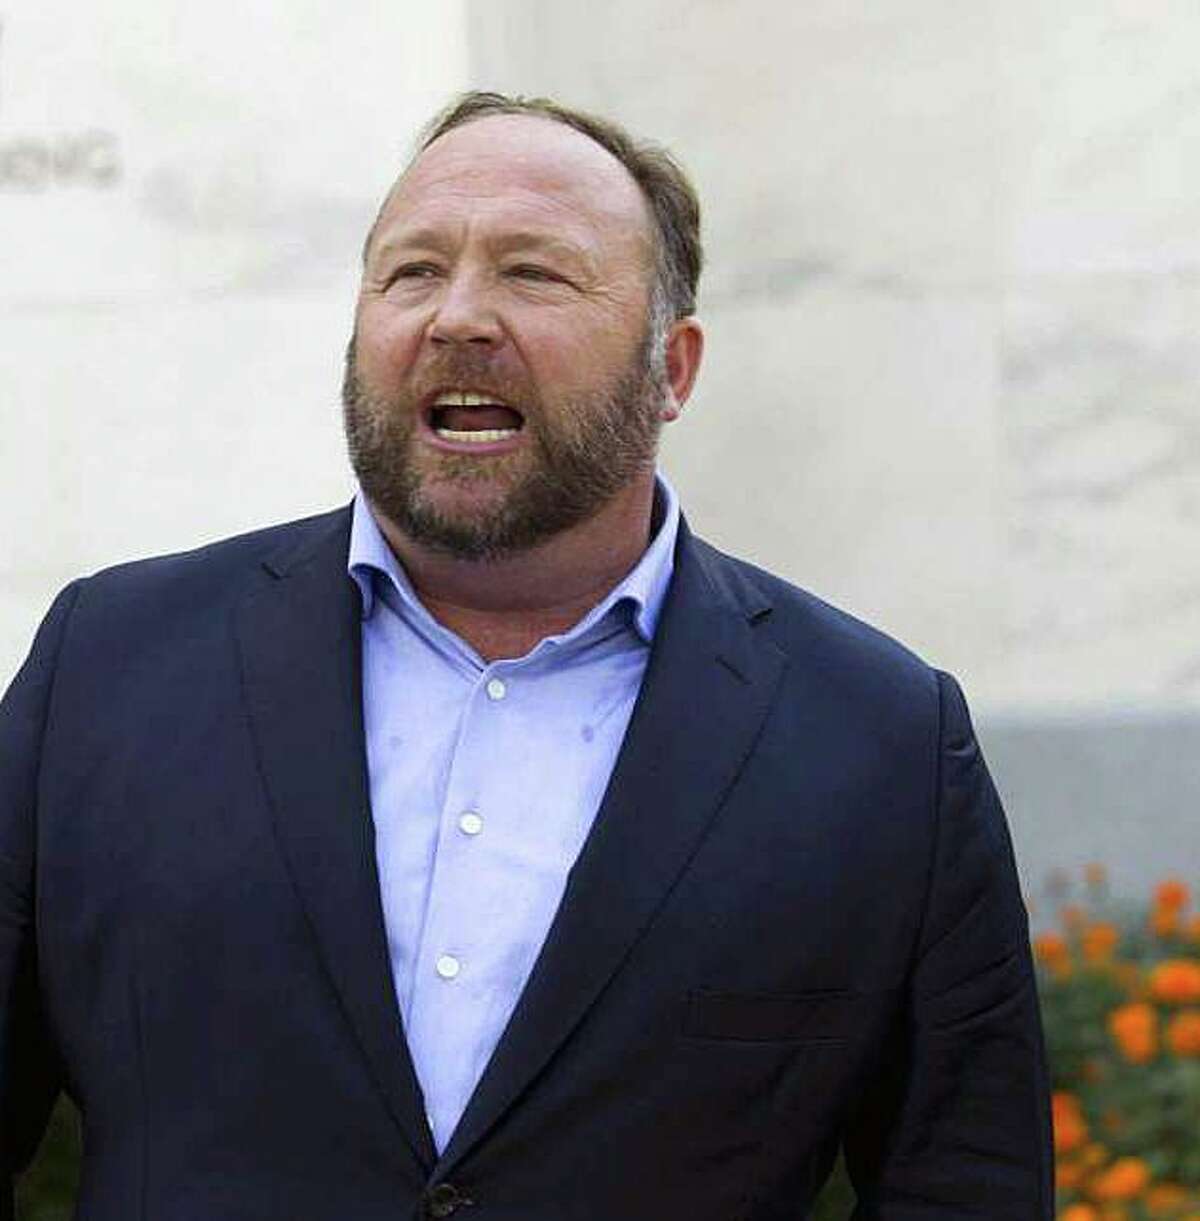 Conspiracy extremist Alex Jones speaks outside of the Dirksen building of Capitol Hill on Wednesday, Sept. 5, 2018, in Washington.